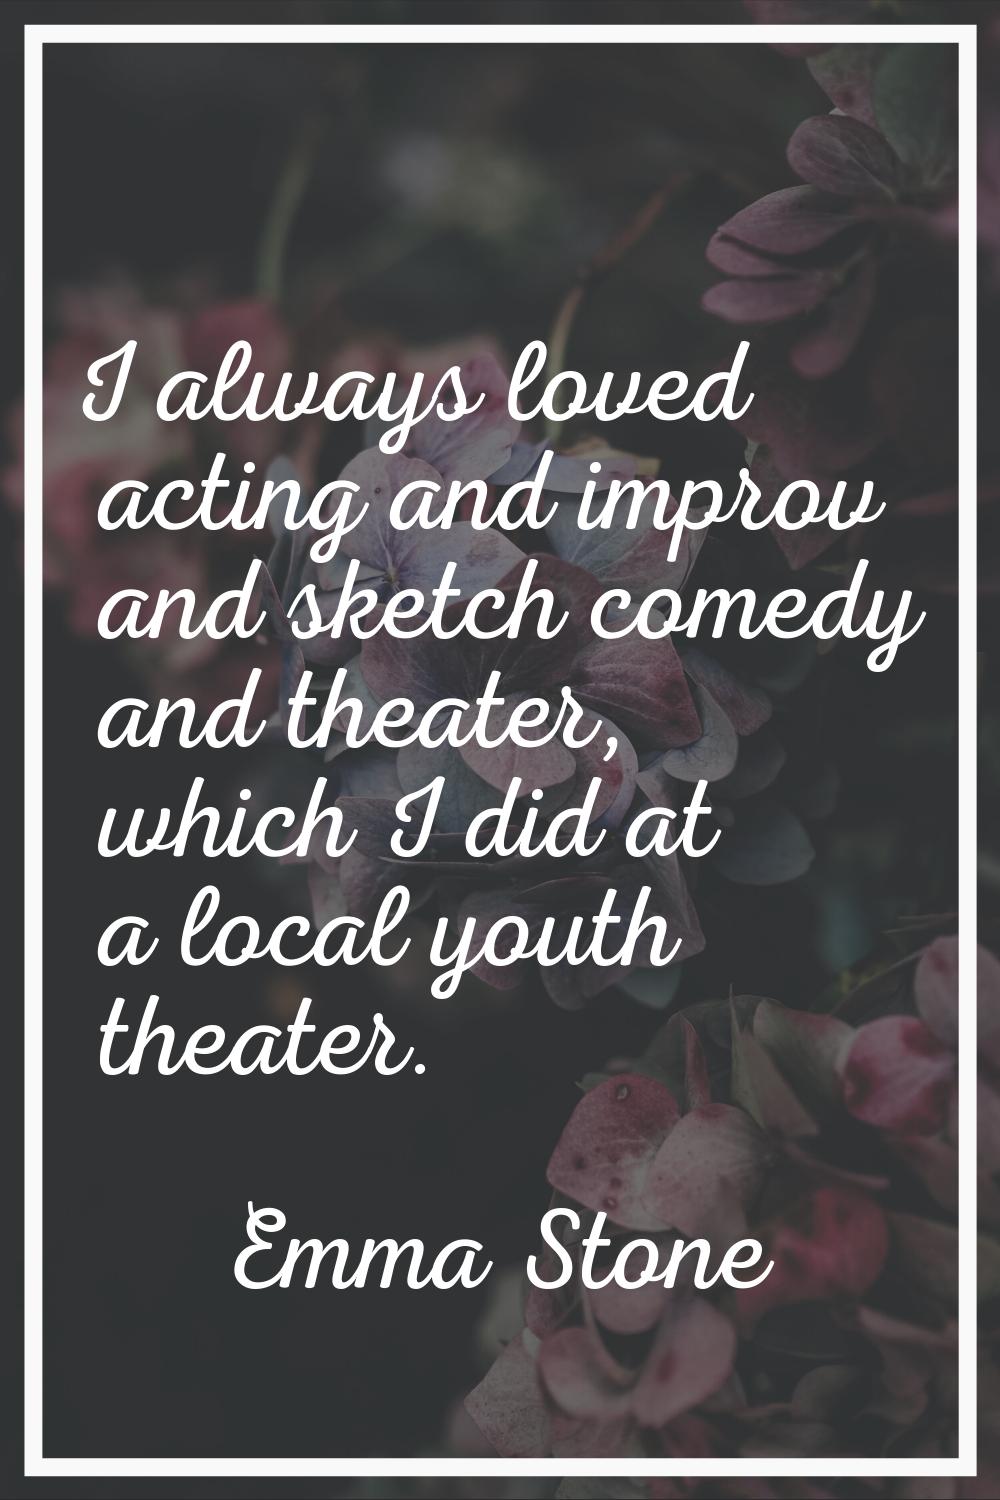 I always loved acting and improv and sketch comedy and theater, which I did at a local youth theate